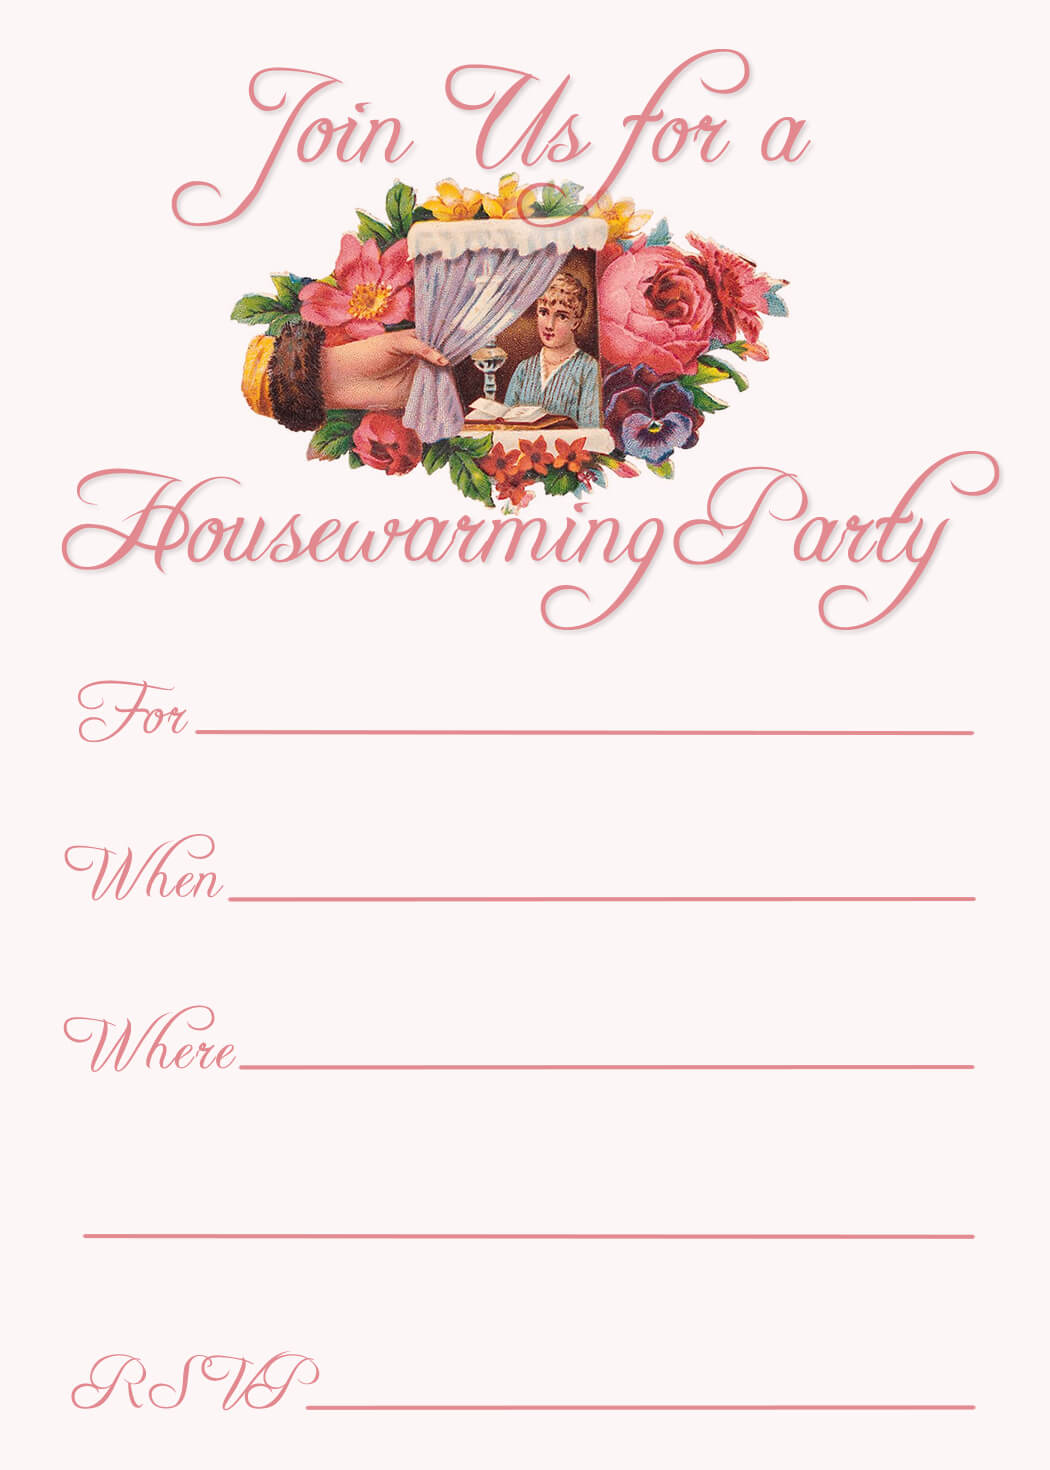 Free Printable Housewarming Party Invitations | Housewarming With Free Housewarming Invitation Card Template